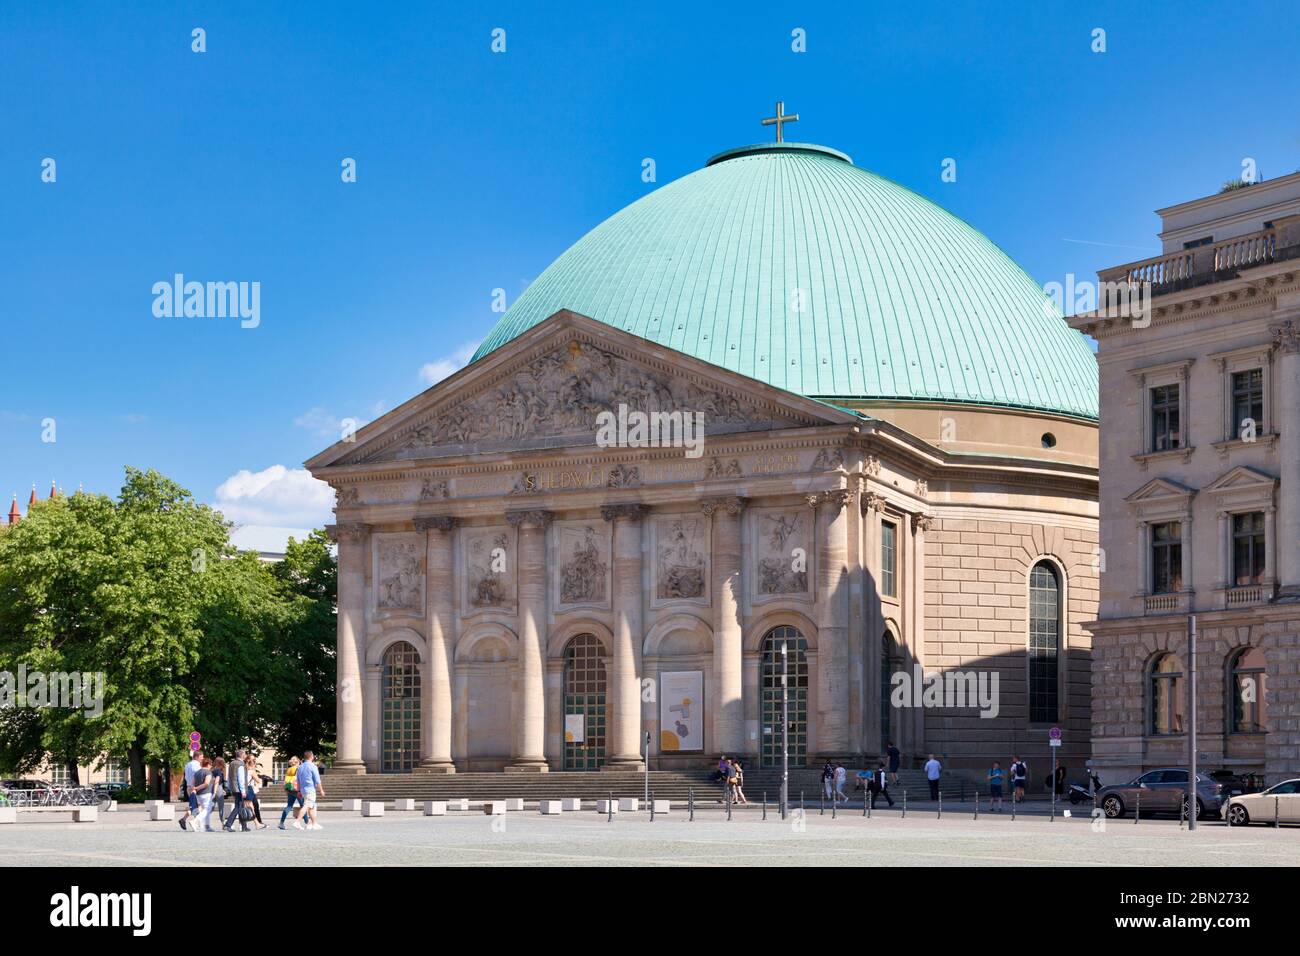 Berlin, Germany - June 01 2019: The St. Hedwig's Cathedral (German: Sankt-Hedwigs-Kathedrale) is a Roman Catholic cathedral on the Bebelplatz. It is t Stock Photo